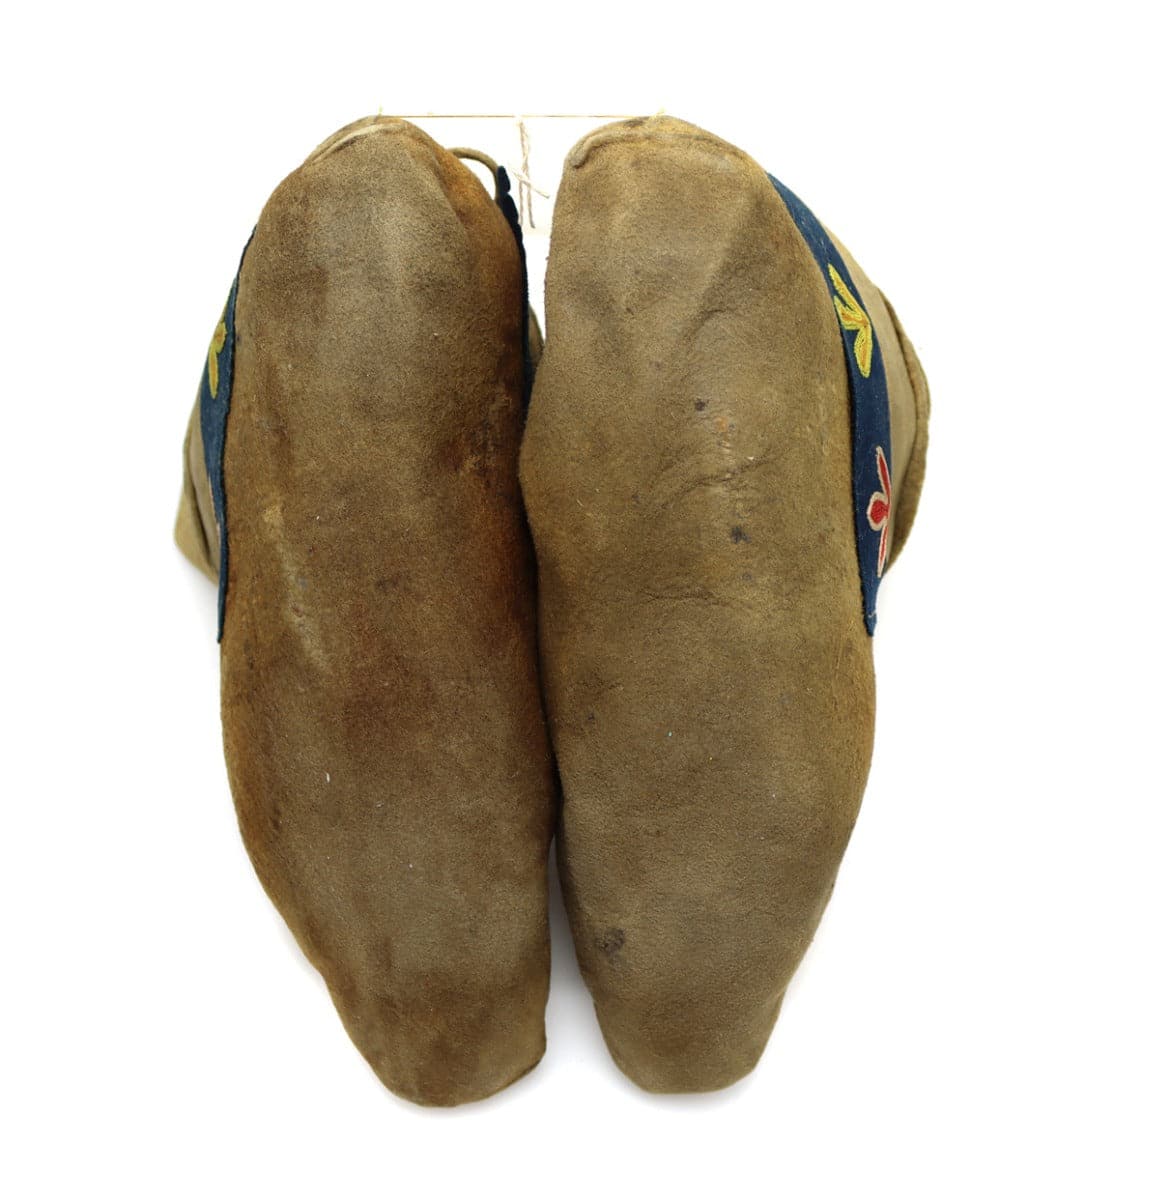 Athabaskan Leather, Trade Cloth, and Beaded Moccasins c. 1890-1900s, 6.75" x 9.5" (DW92323A-0421-001) 5
